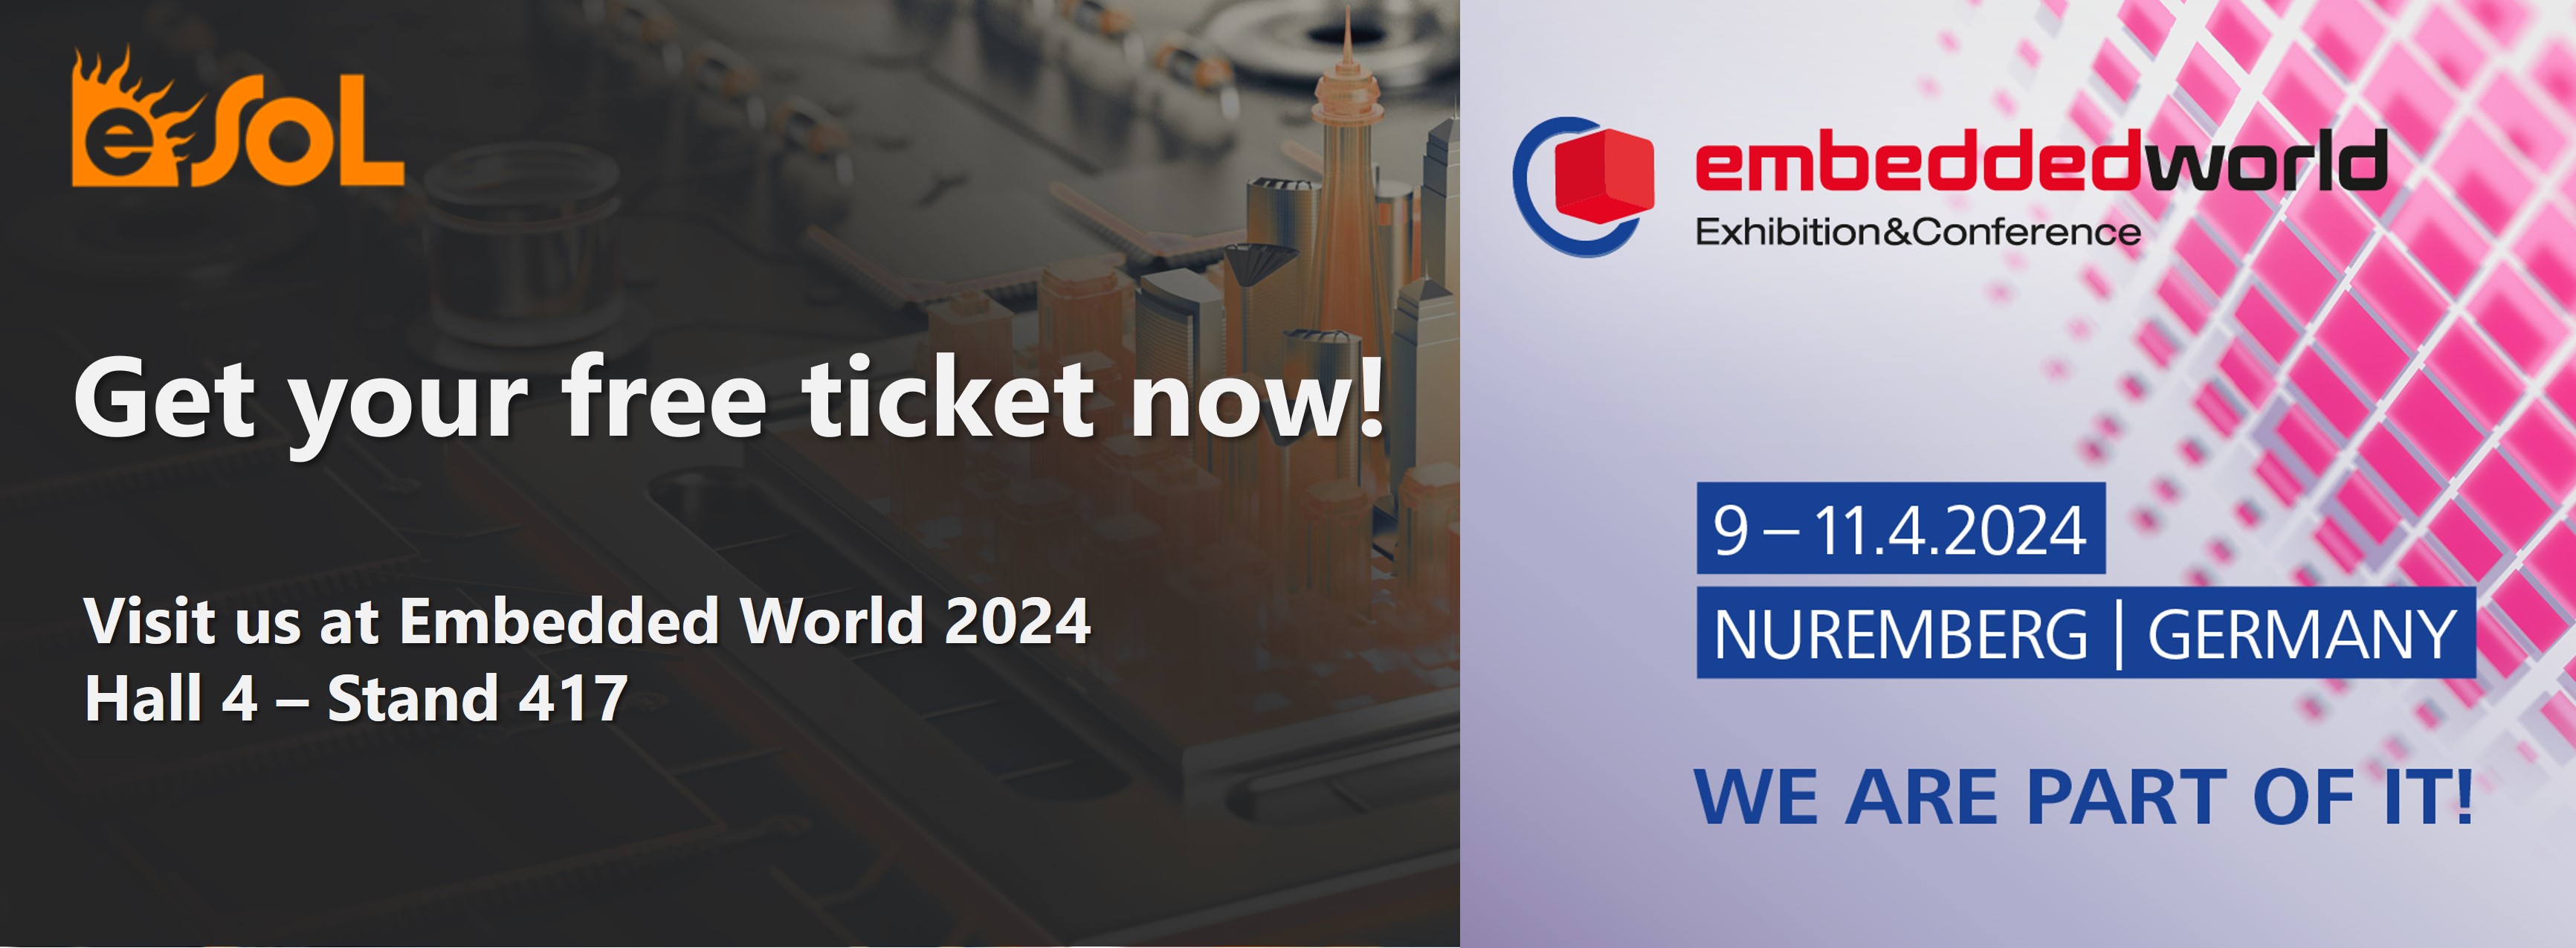 Join eSOL at Embedded World 2024 in Nuremberg!